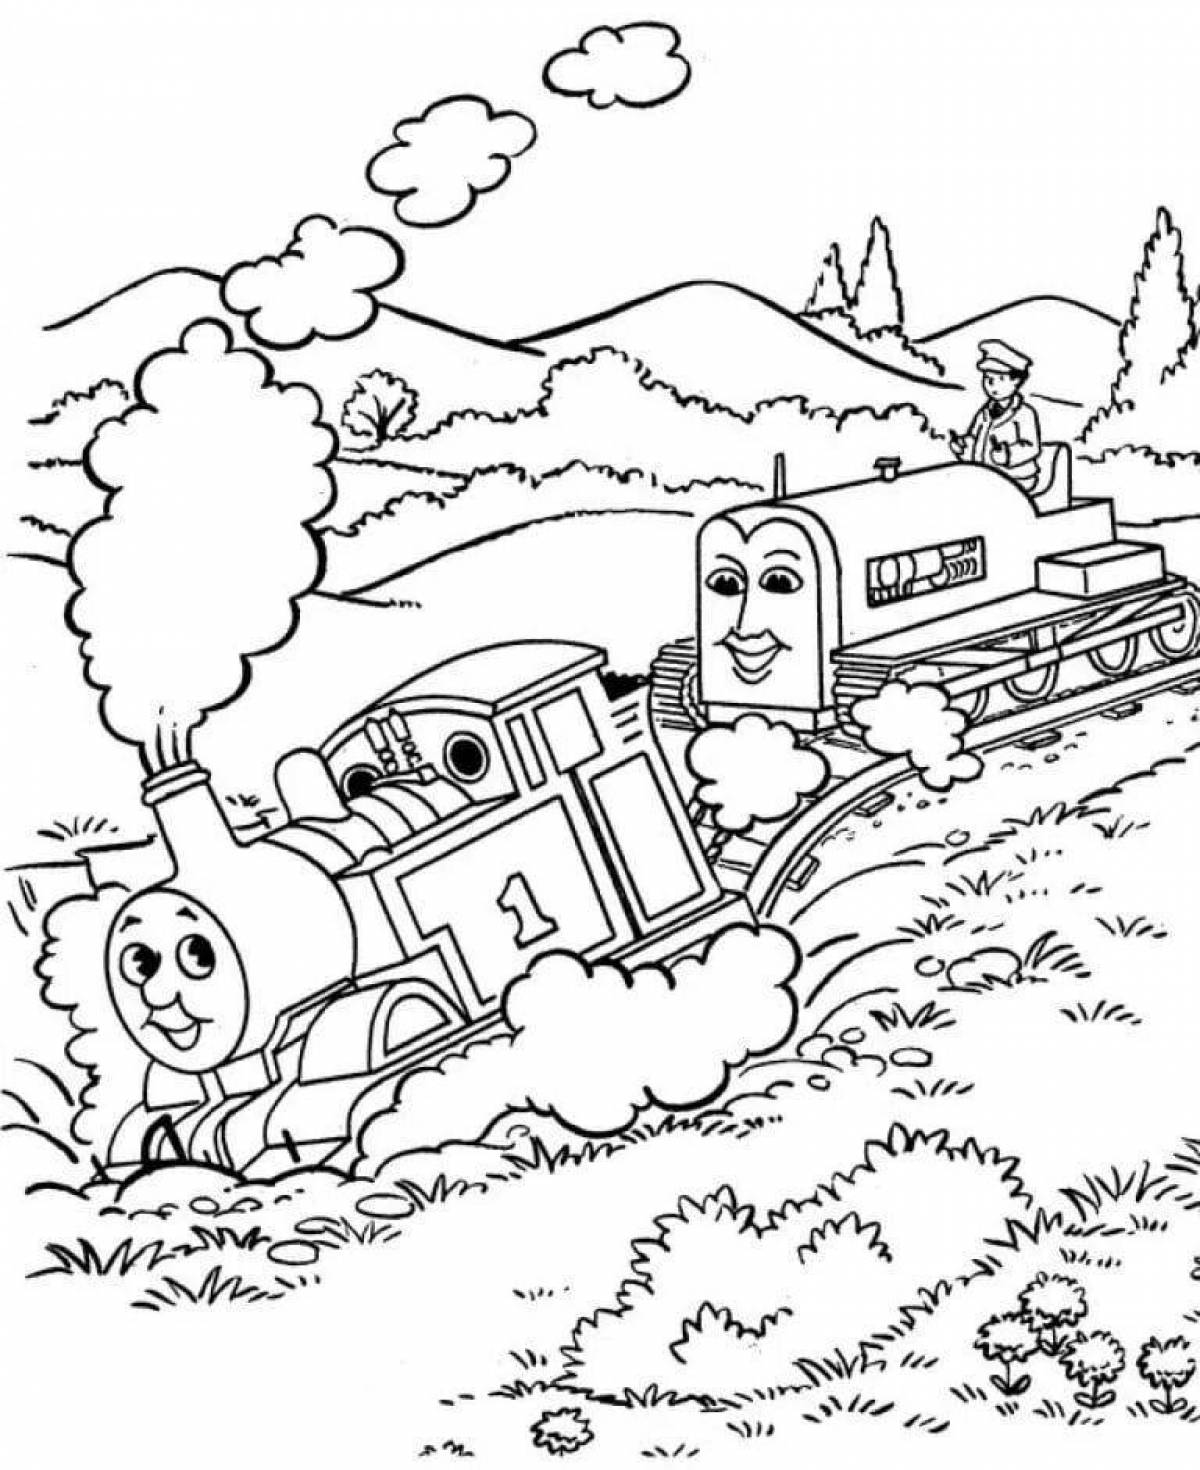 Thomas the Wonderful Tank Engine coloring pages for kids